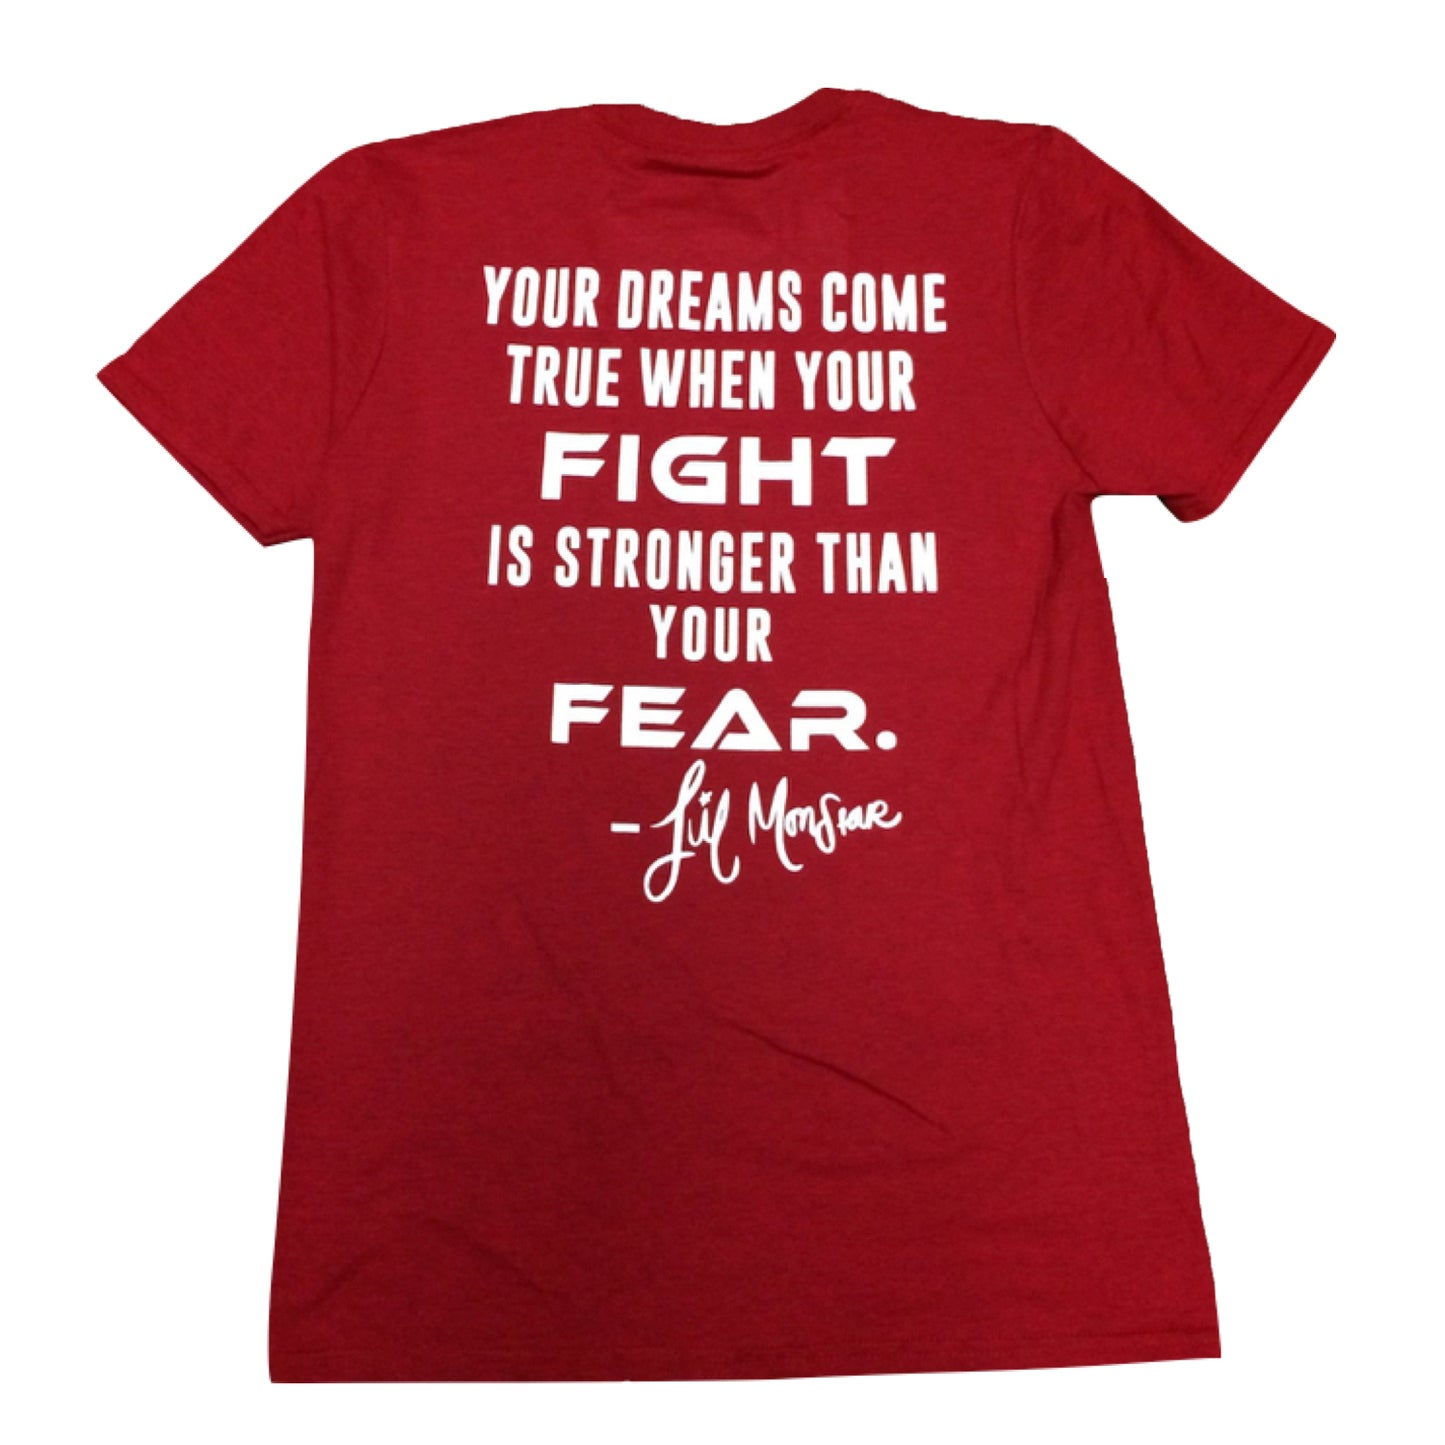 Lil Monstar Edition Fight over Fear T-Shirt